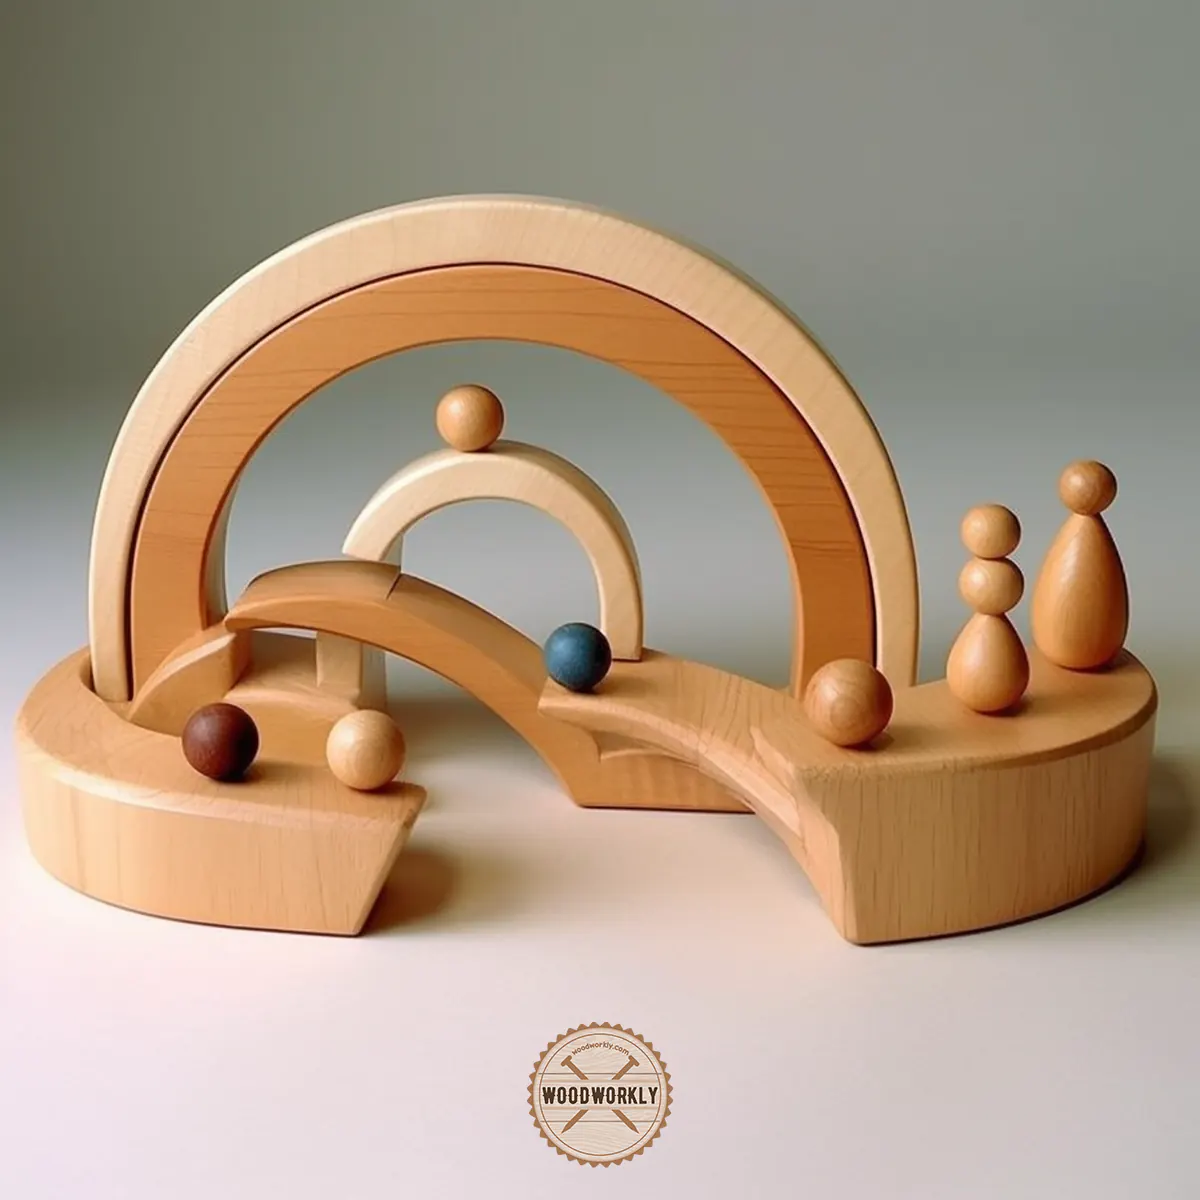 Wood toy made by bending wood pieces